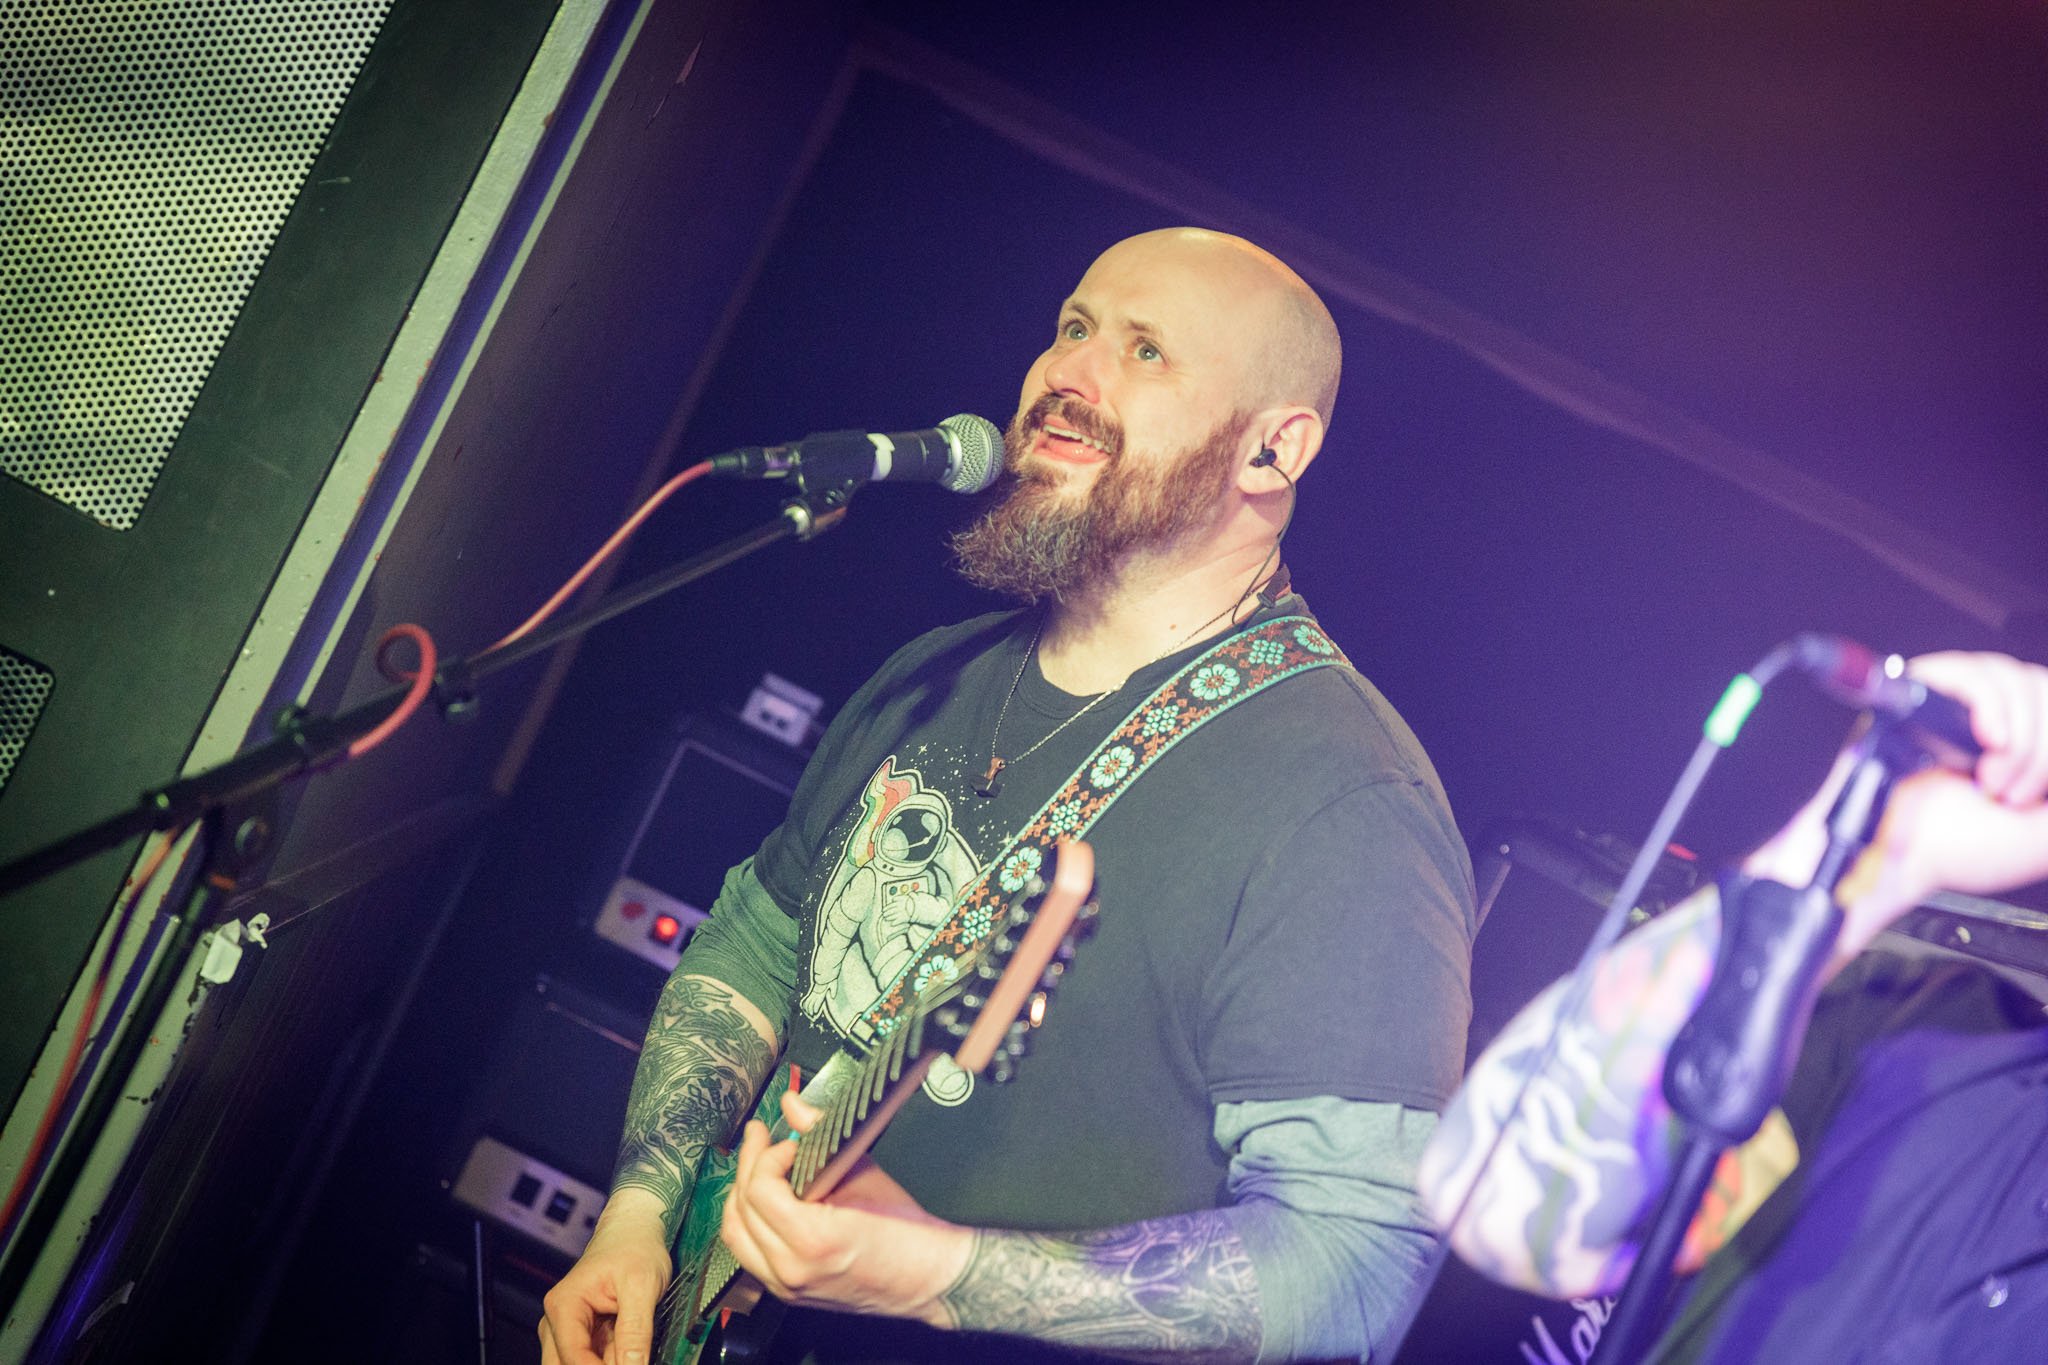 Attic Theory at the Retro in Manchester on March 12th 2023 ©Joh